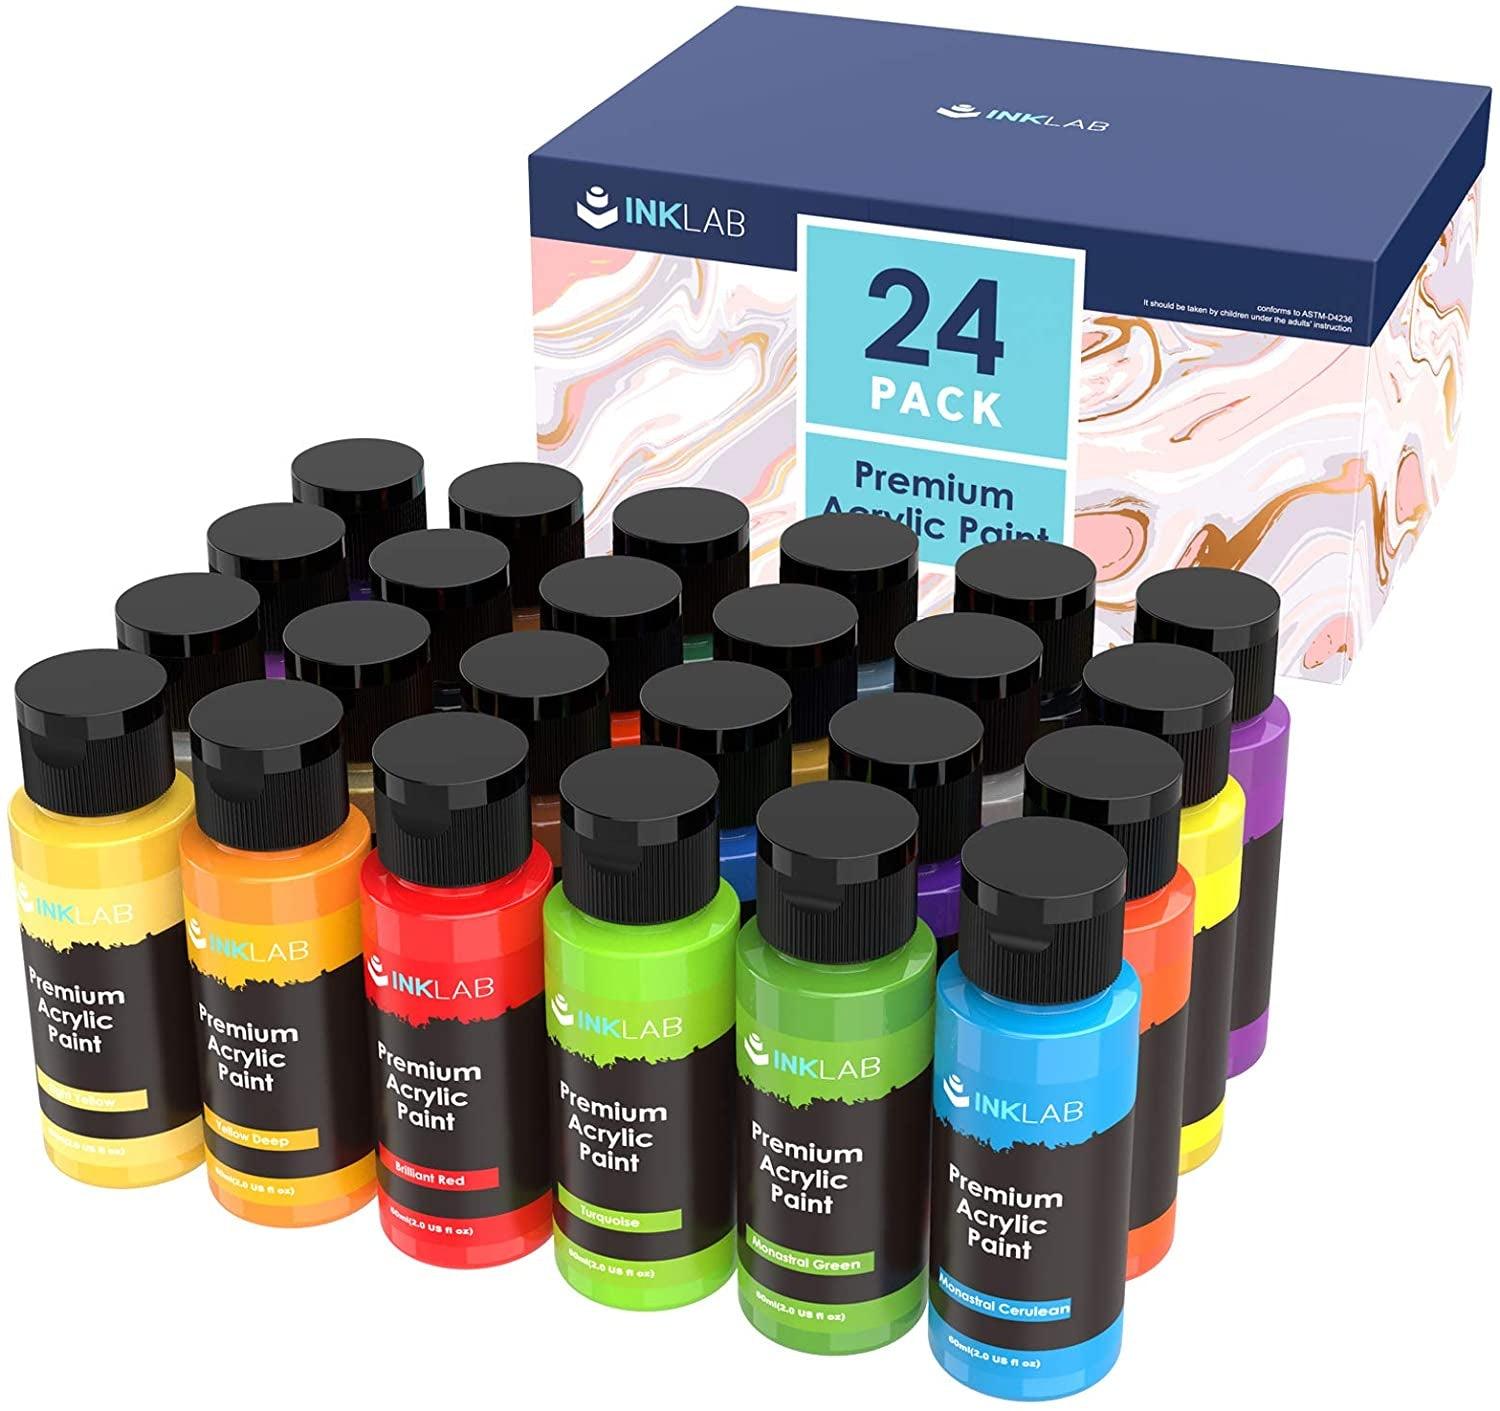 Aen Art Acrylic Paint Set 16 Colors Painting Supplies for Canvas Wood  Fabric Ceramic Crafts Non Toxic&Rich Pigments for Beginners